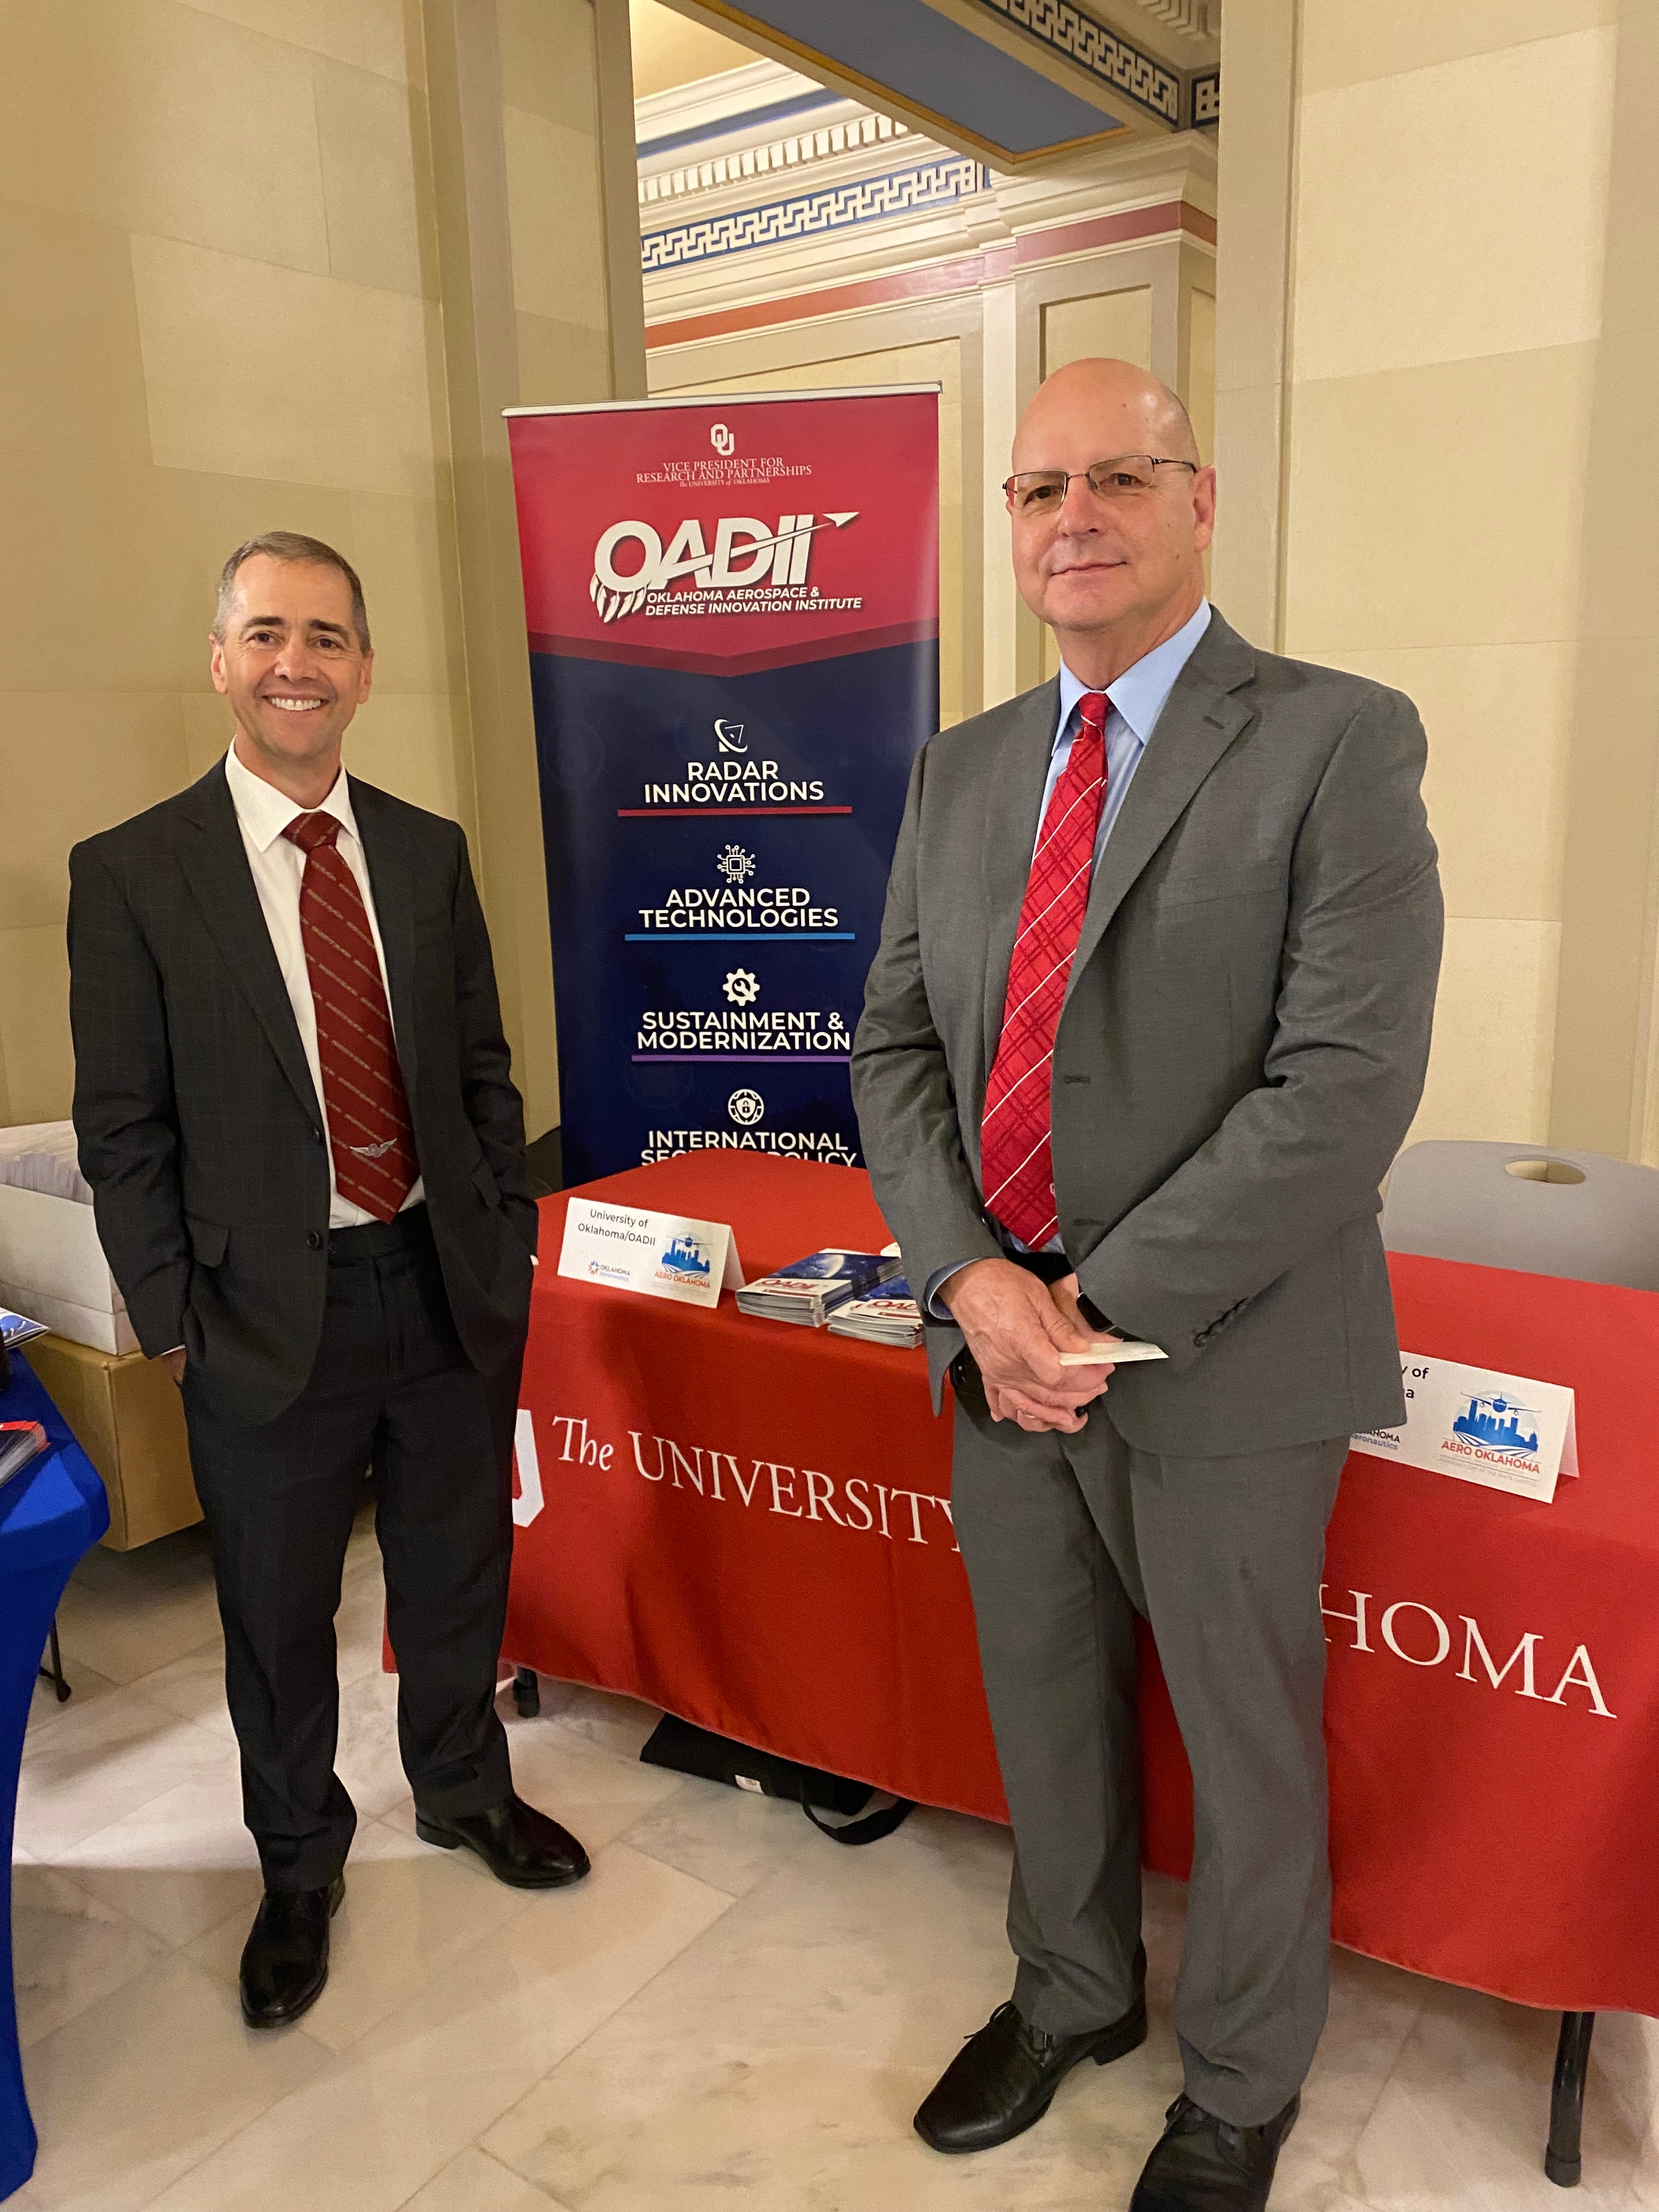 OADII Operations Manager, Cliff Wojtalewicz and Shad Satterthwaite, Director of the OU Executive Business Programs, Aerospace and Defense 